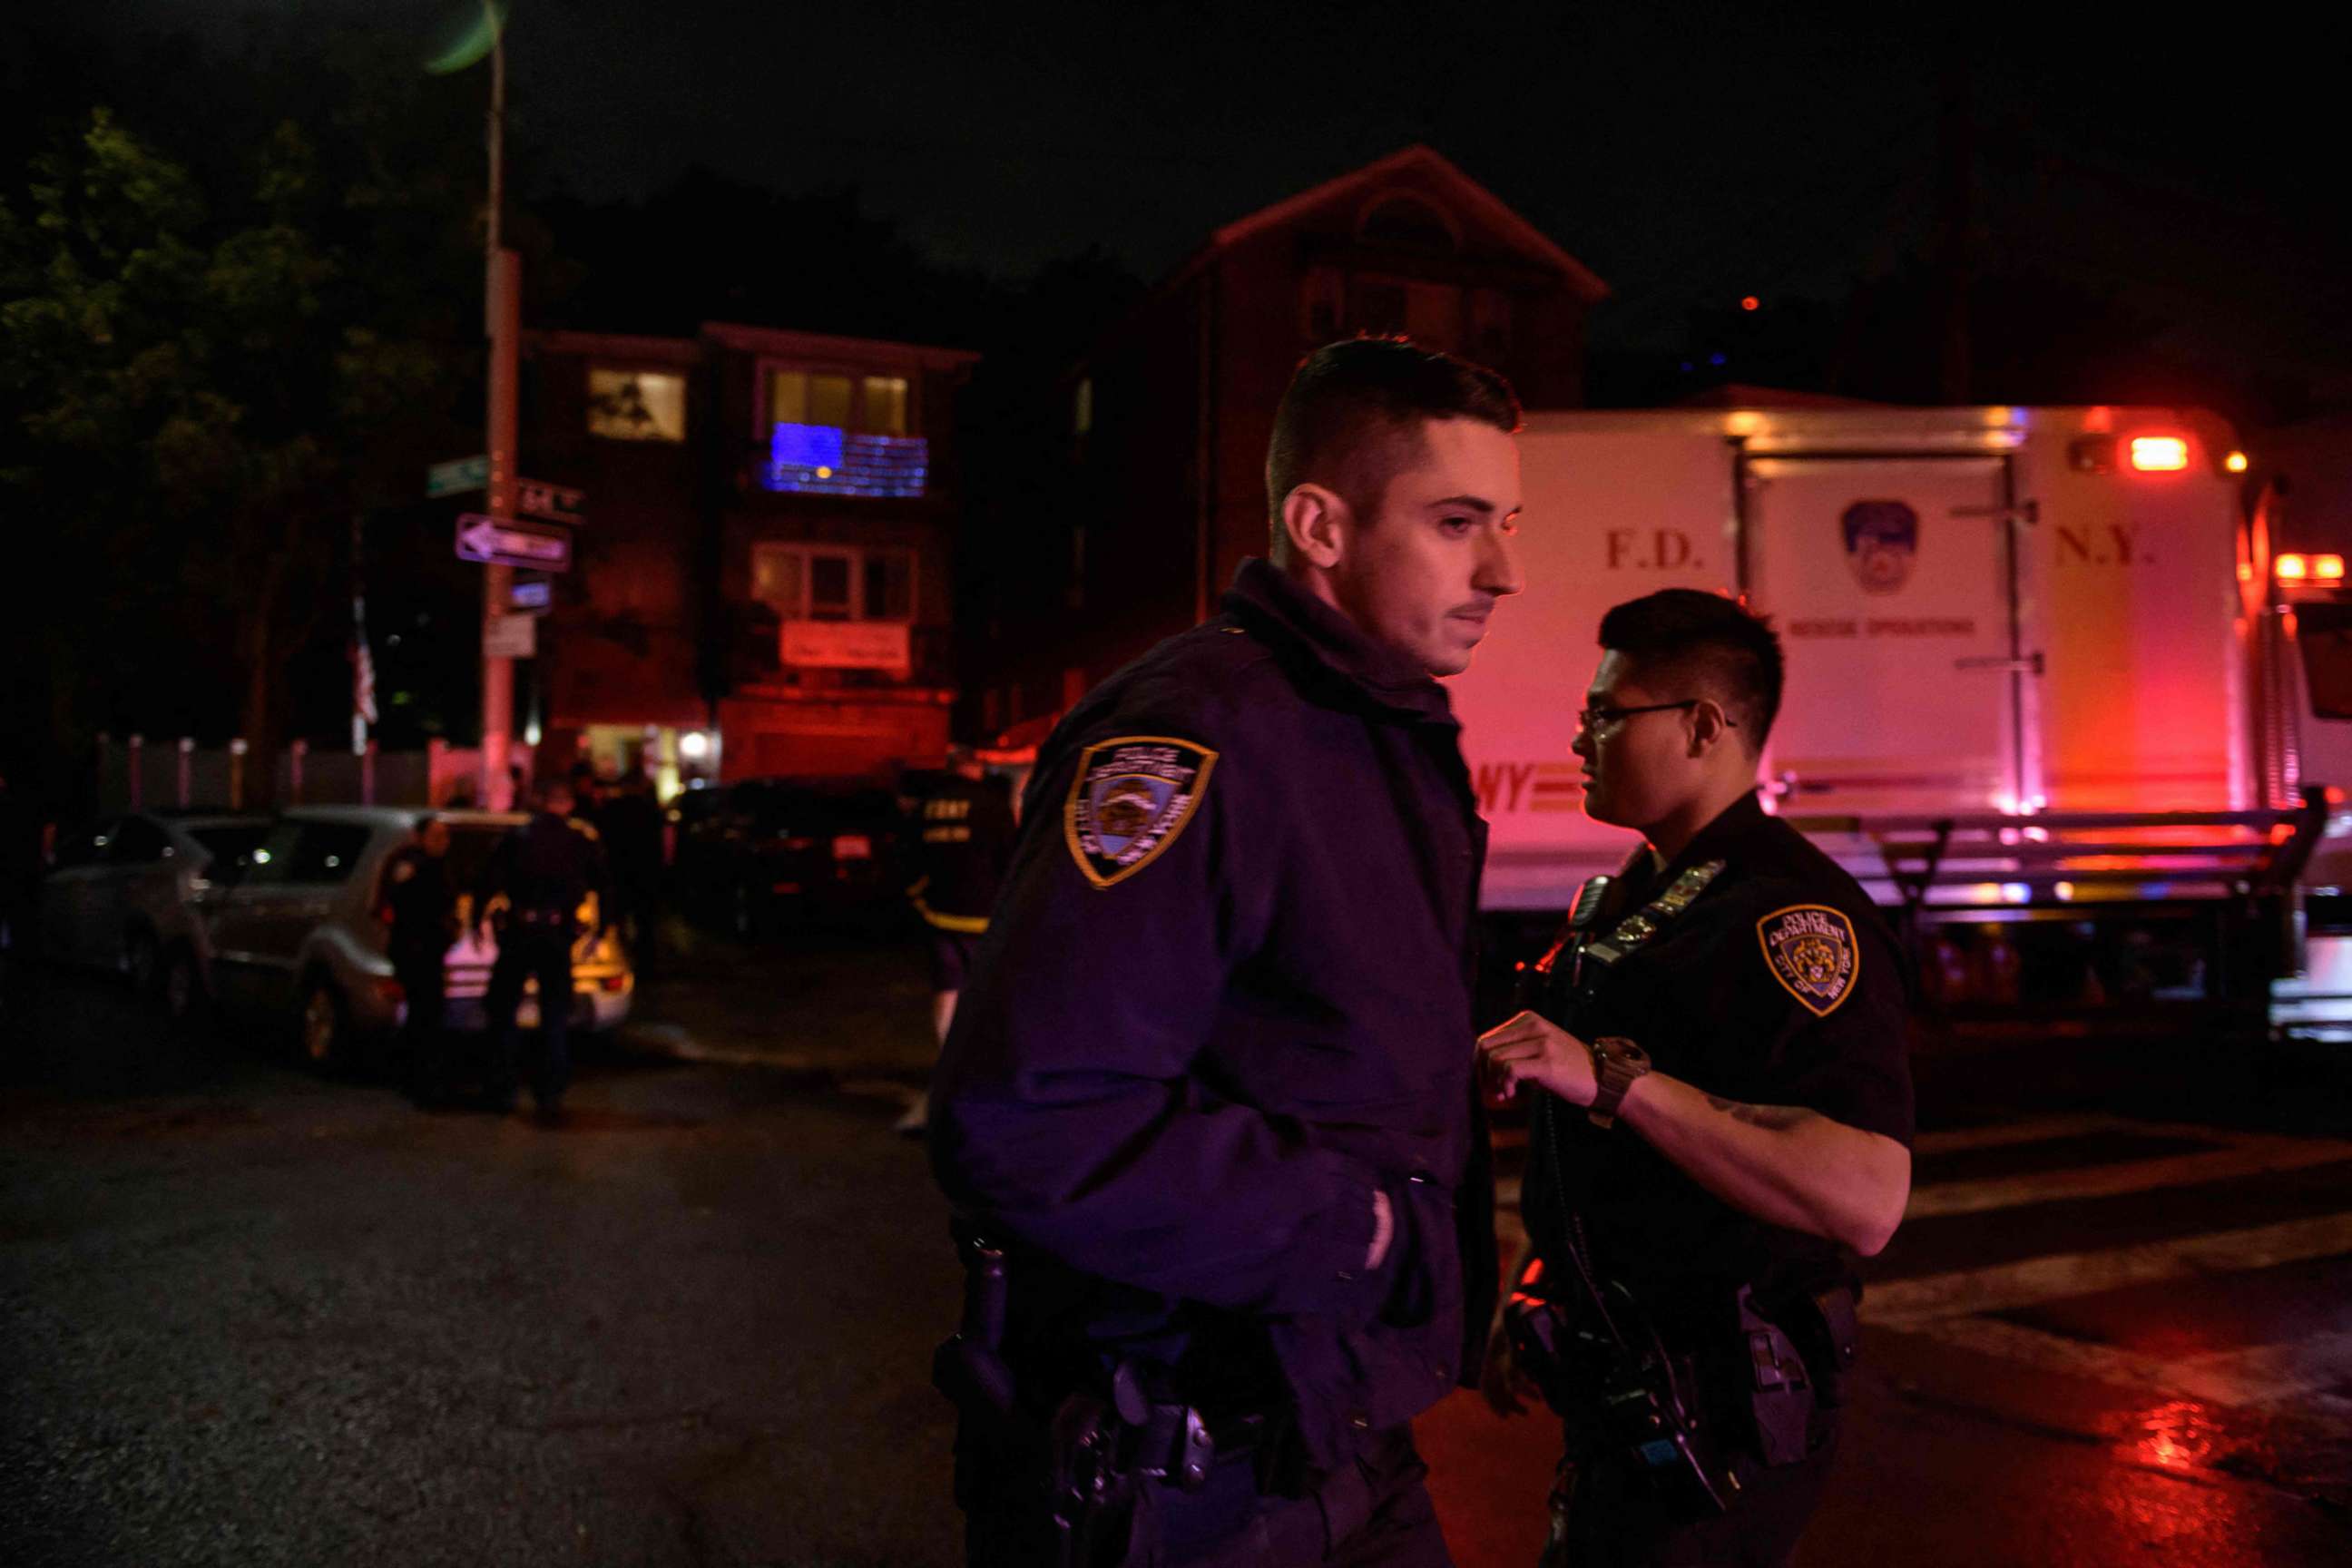 PHOTO: Police officers and rescue workers gather outside a house where people were trapped in a flooded basement in Queens, New York, early on Sept. 2, 2021.